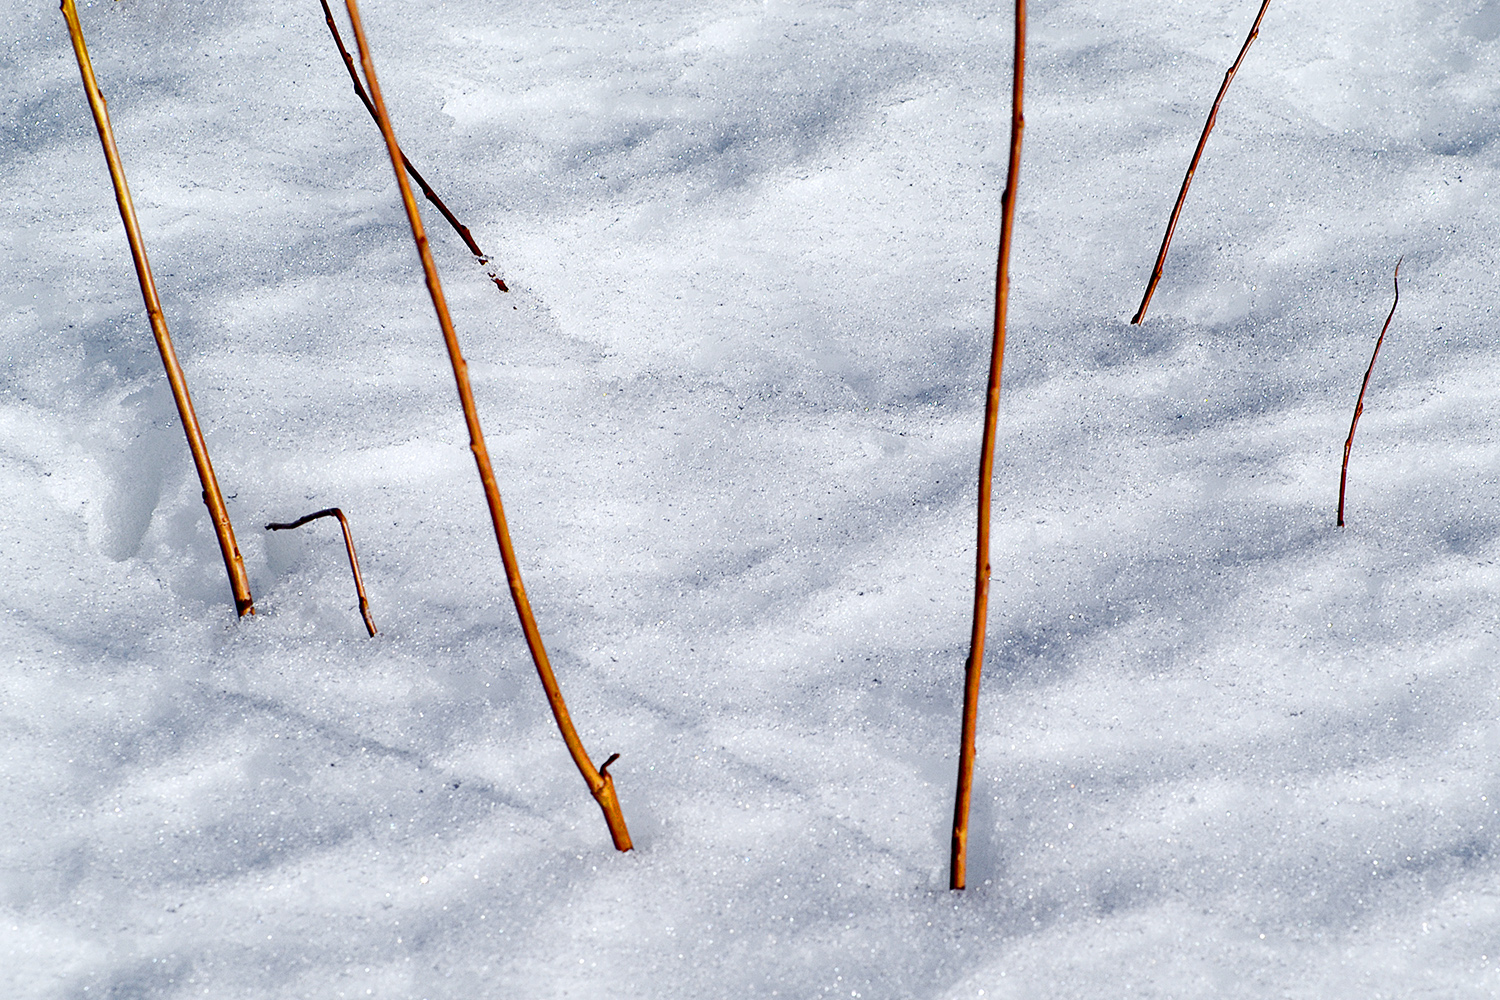 Plant Stalks in Snow, Walker River Canyon